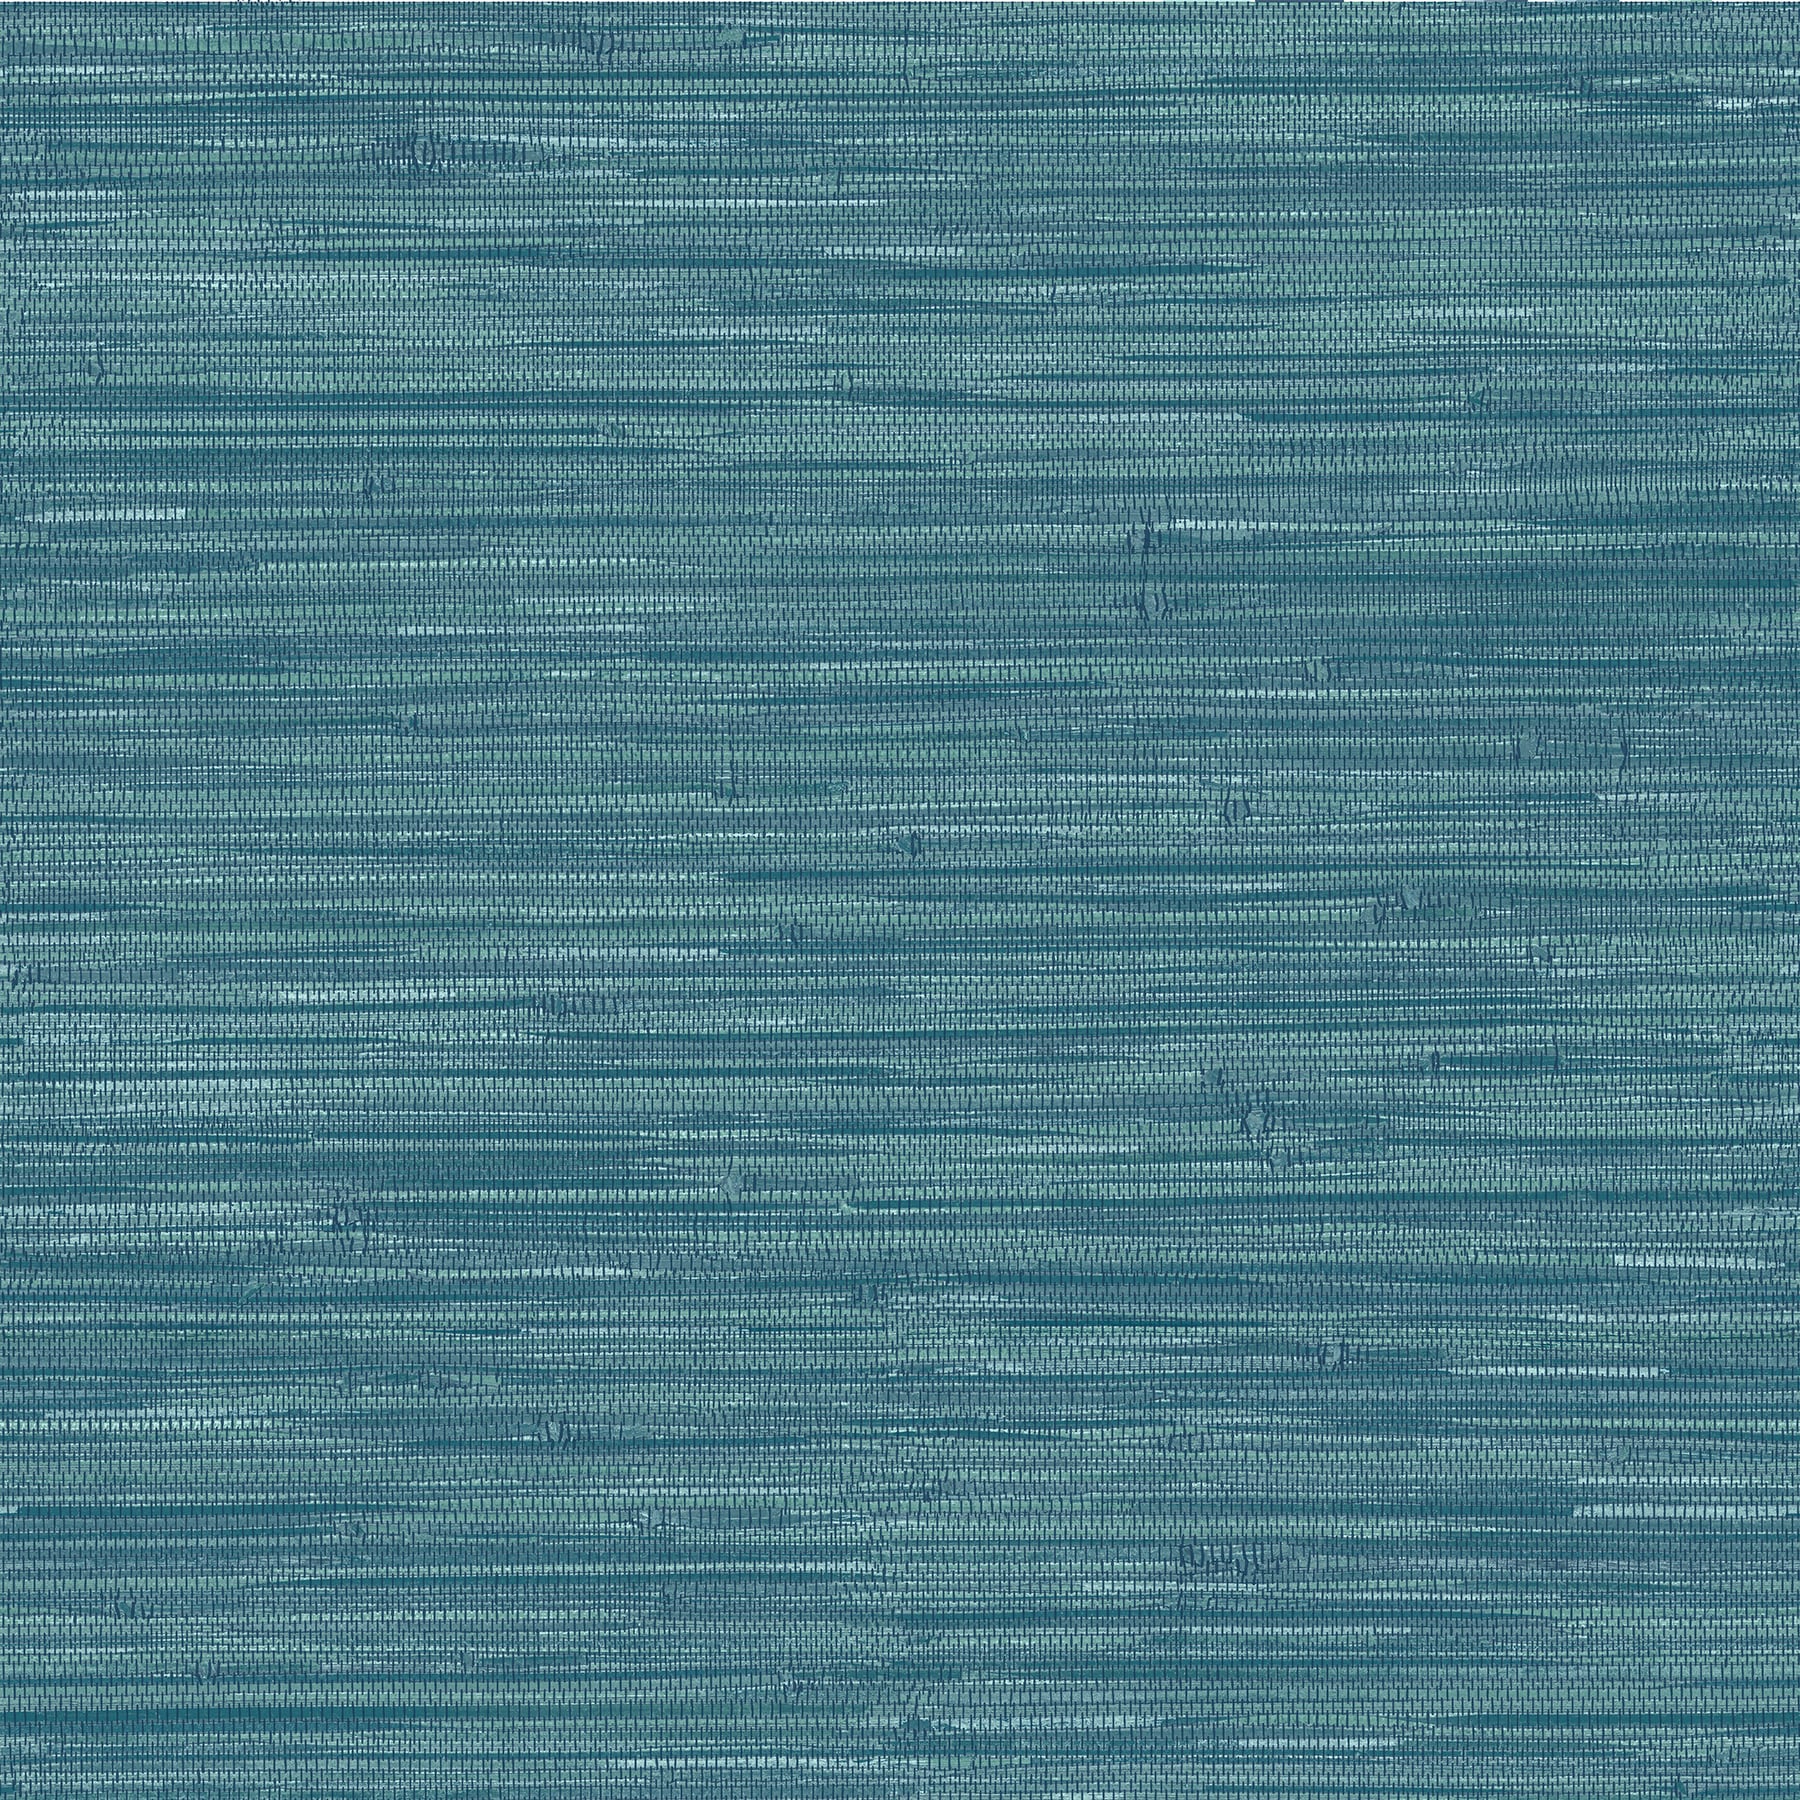 SSS4573  Sky Blue Classic Faux Grasscloth Peel and Stick Wallpaper  by  Society Social x WallPops